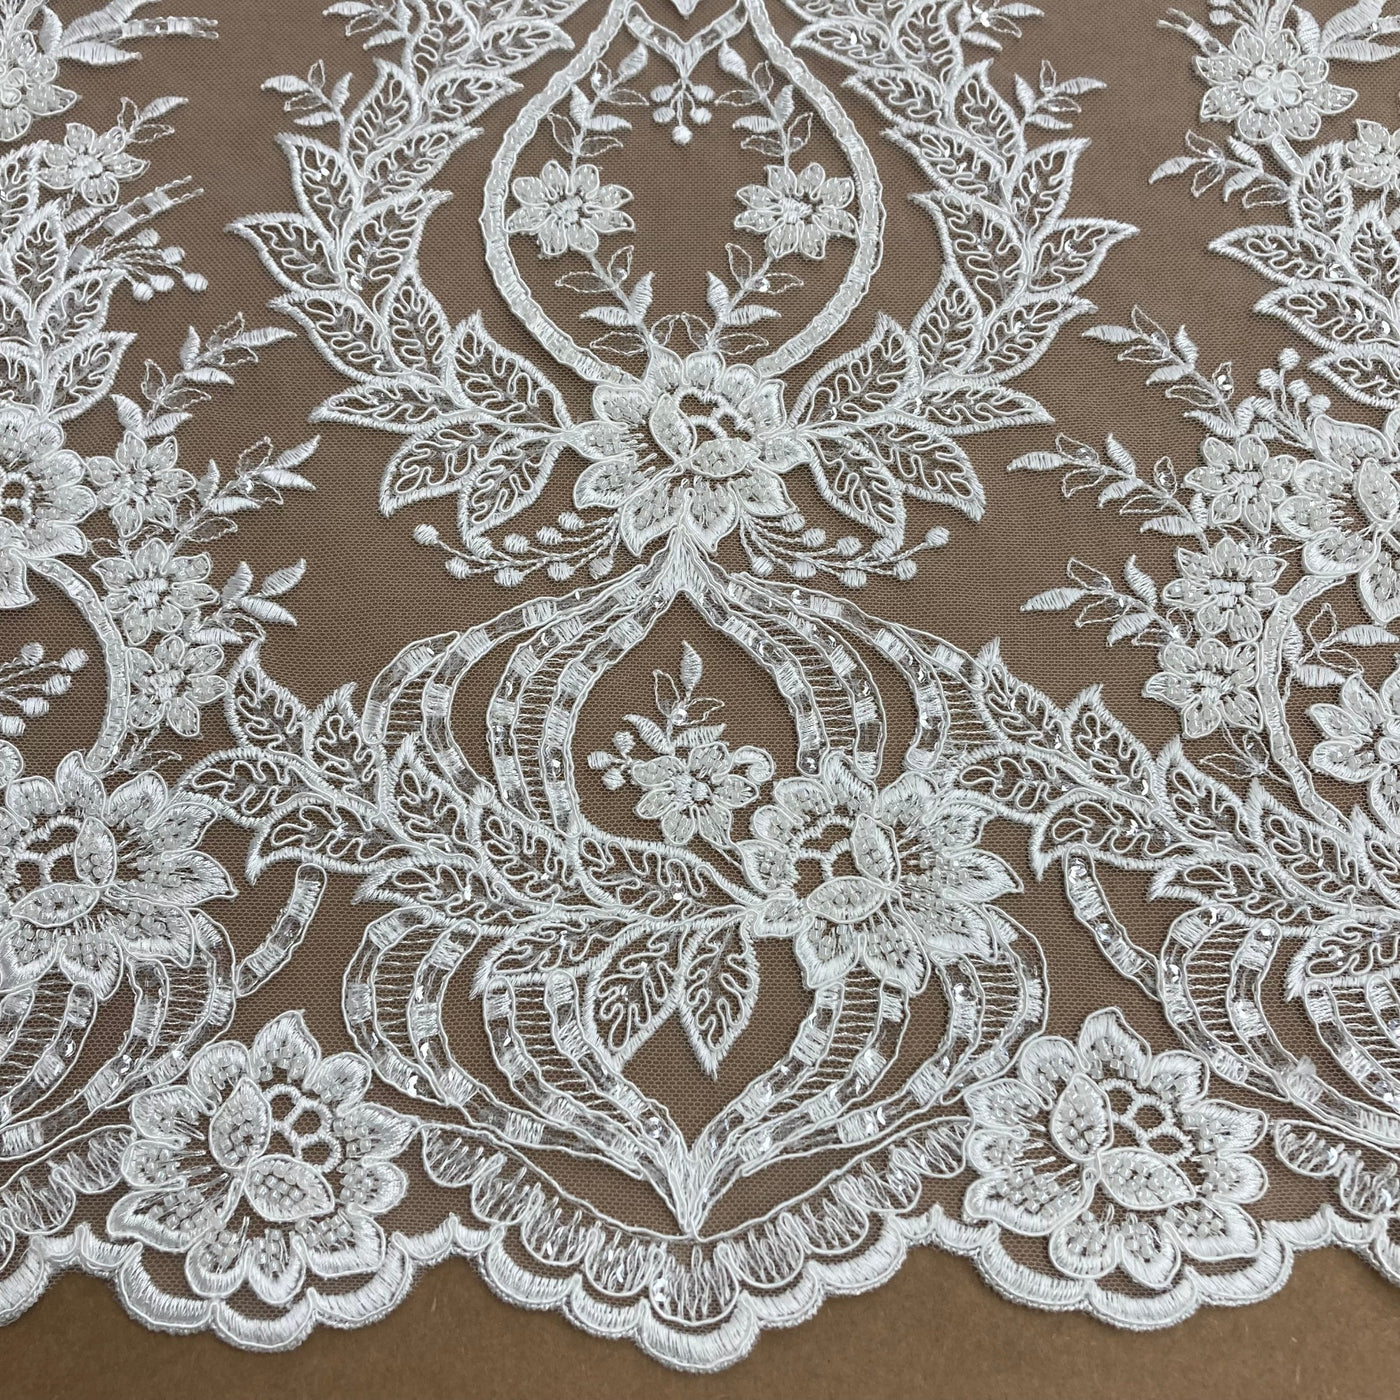 Corded & Beaded Ivory Bridal Lace Fabric Embroidered on 100% Polyester Net Mesh. Lace Usa